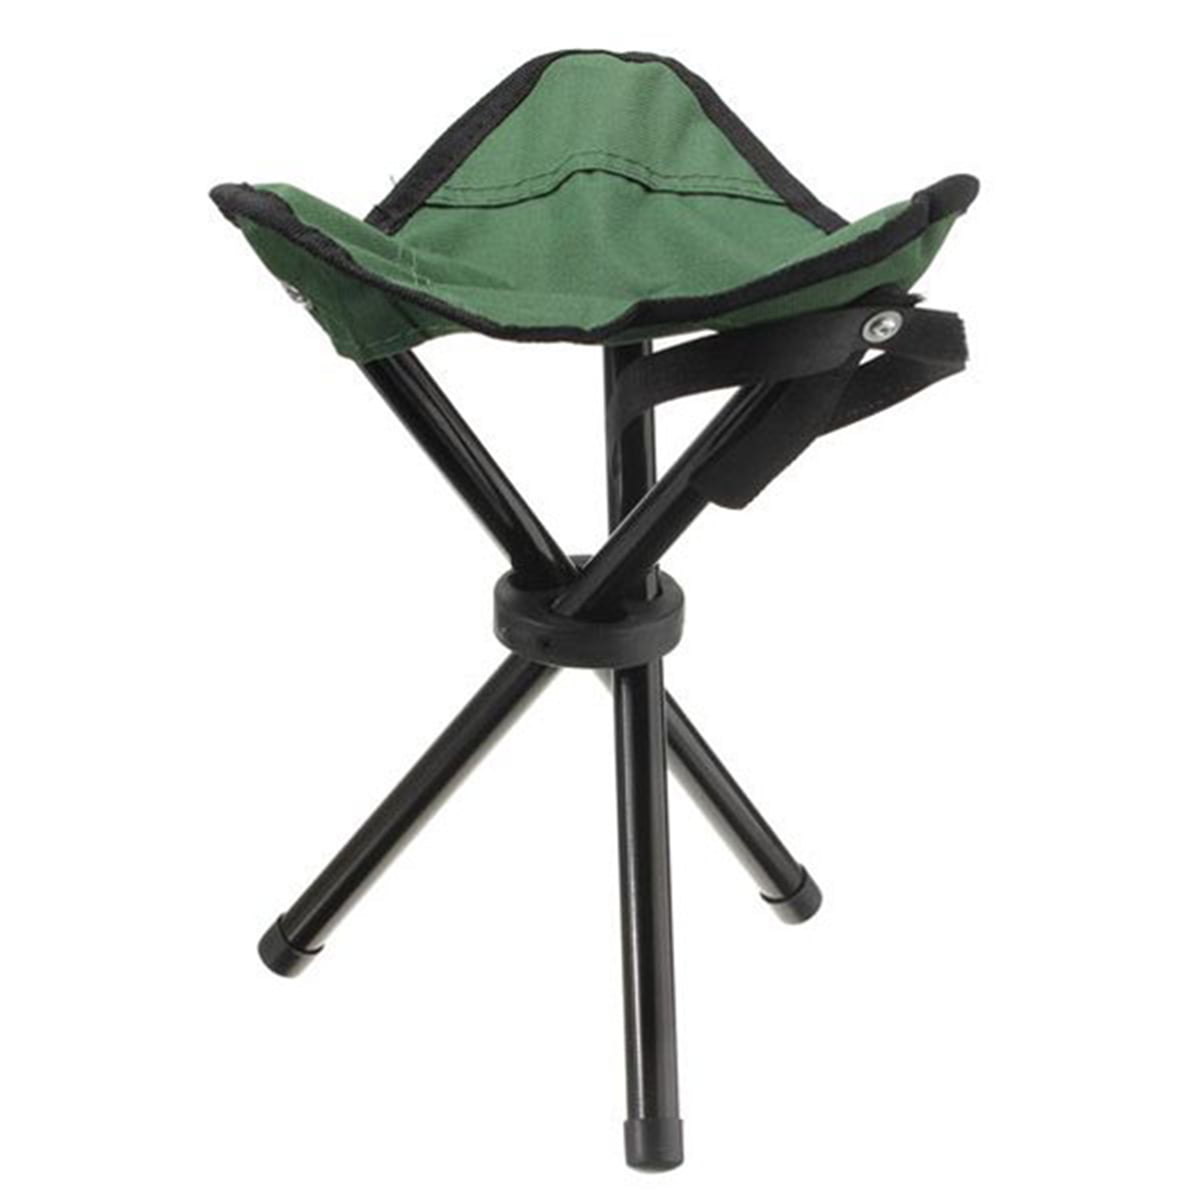 Portable Folding Camping Stool Collapsible Outdoor Folding Seat Slacker Chair for Travel Fishing Hiking Garden Beach